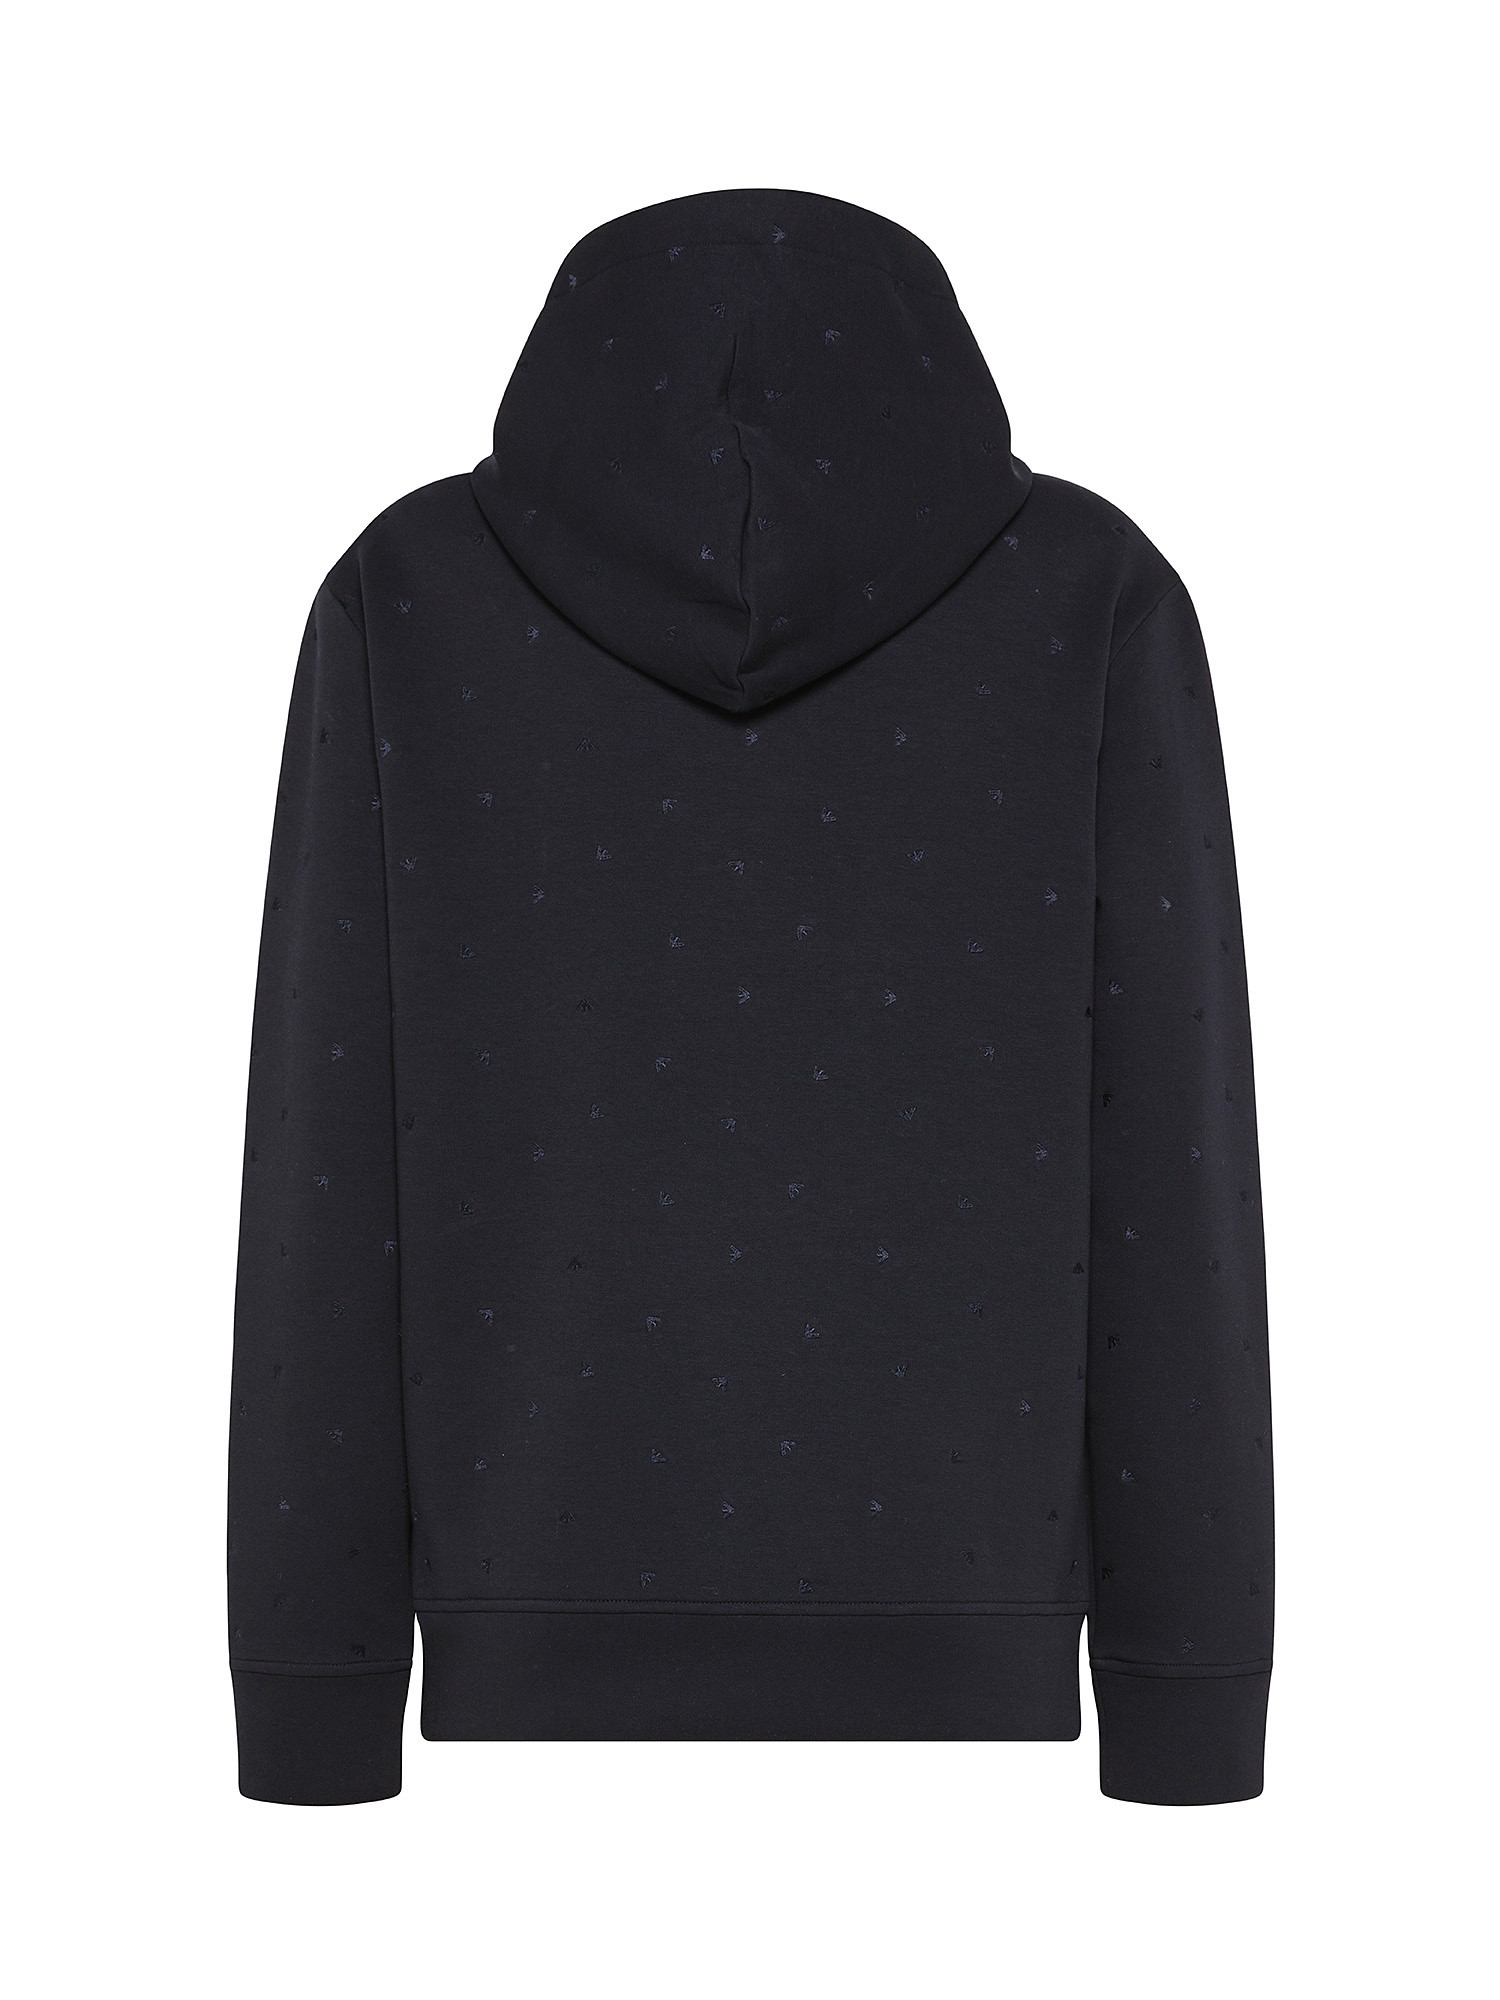 Emporio Armani - Hooded sweatshirt with all-over eagle logo embroidery., Dark Blue, large image number 1